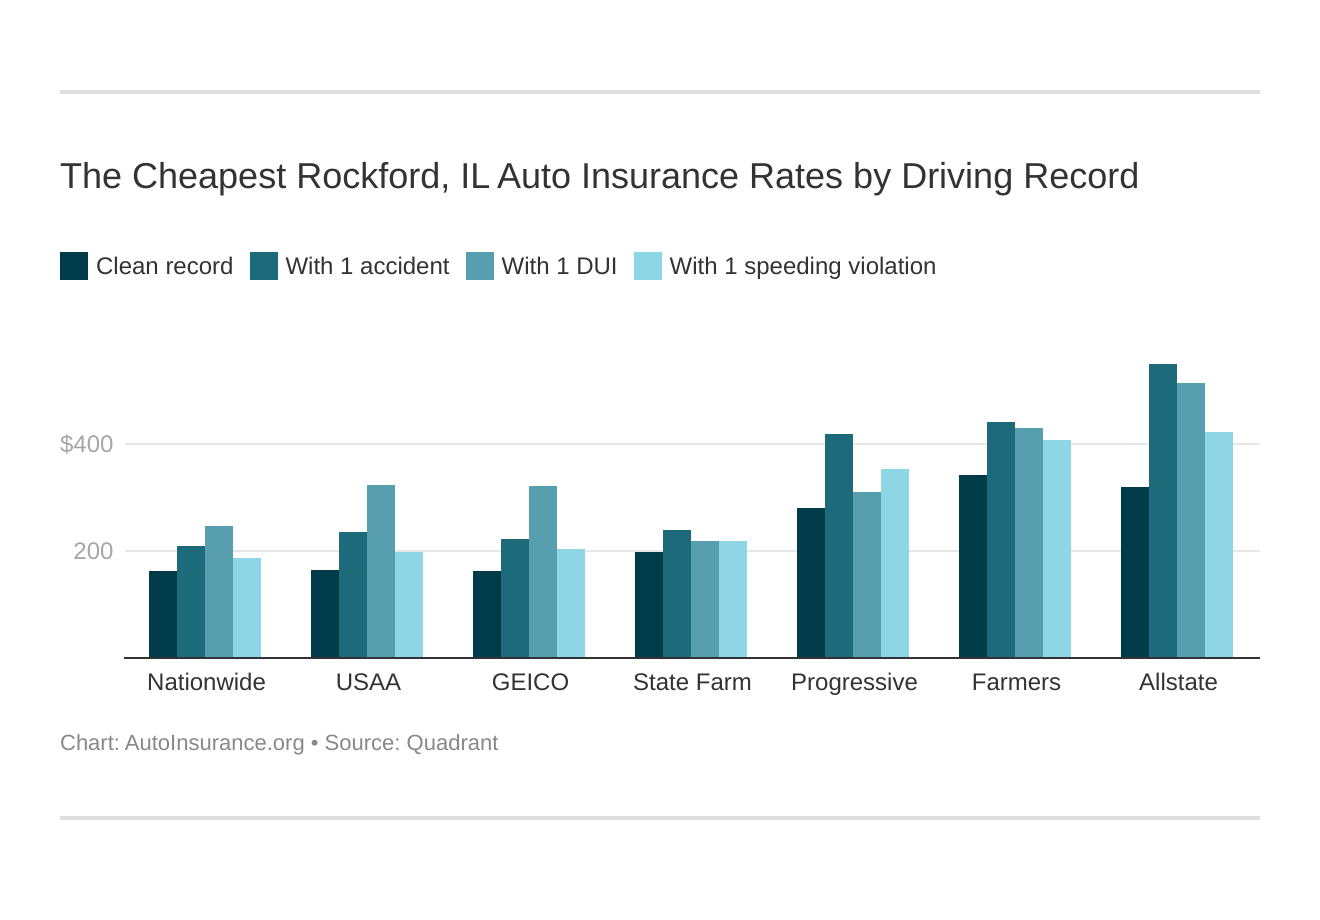 The Cheapest Rockford, IL Auto Insurance Rates by Driving Record